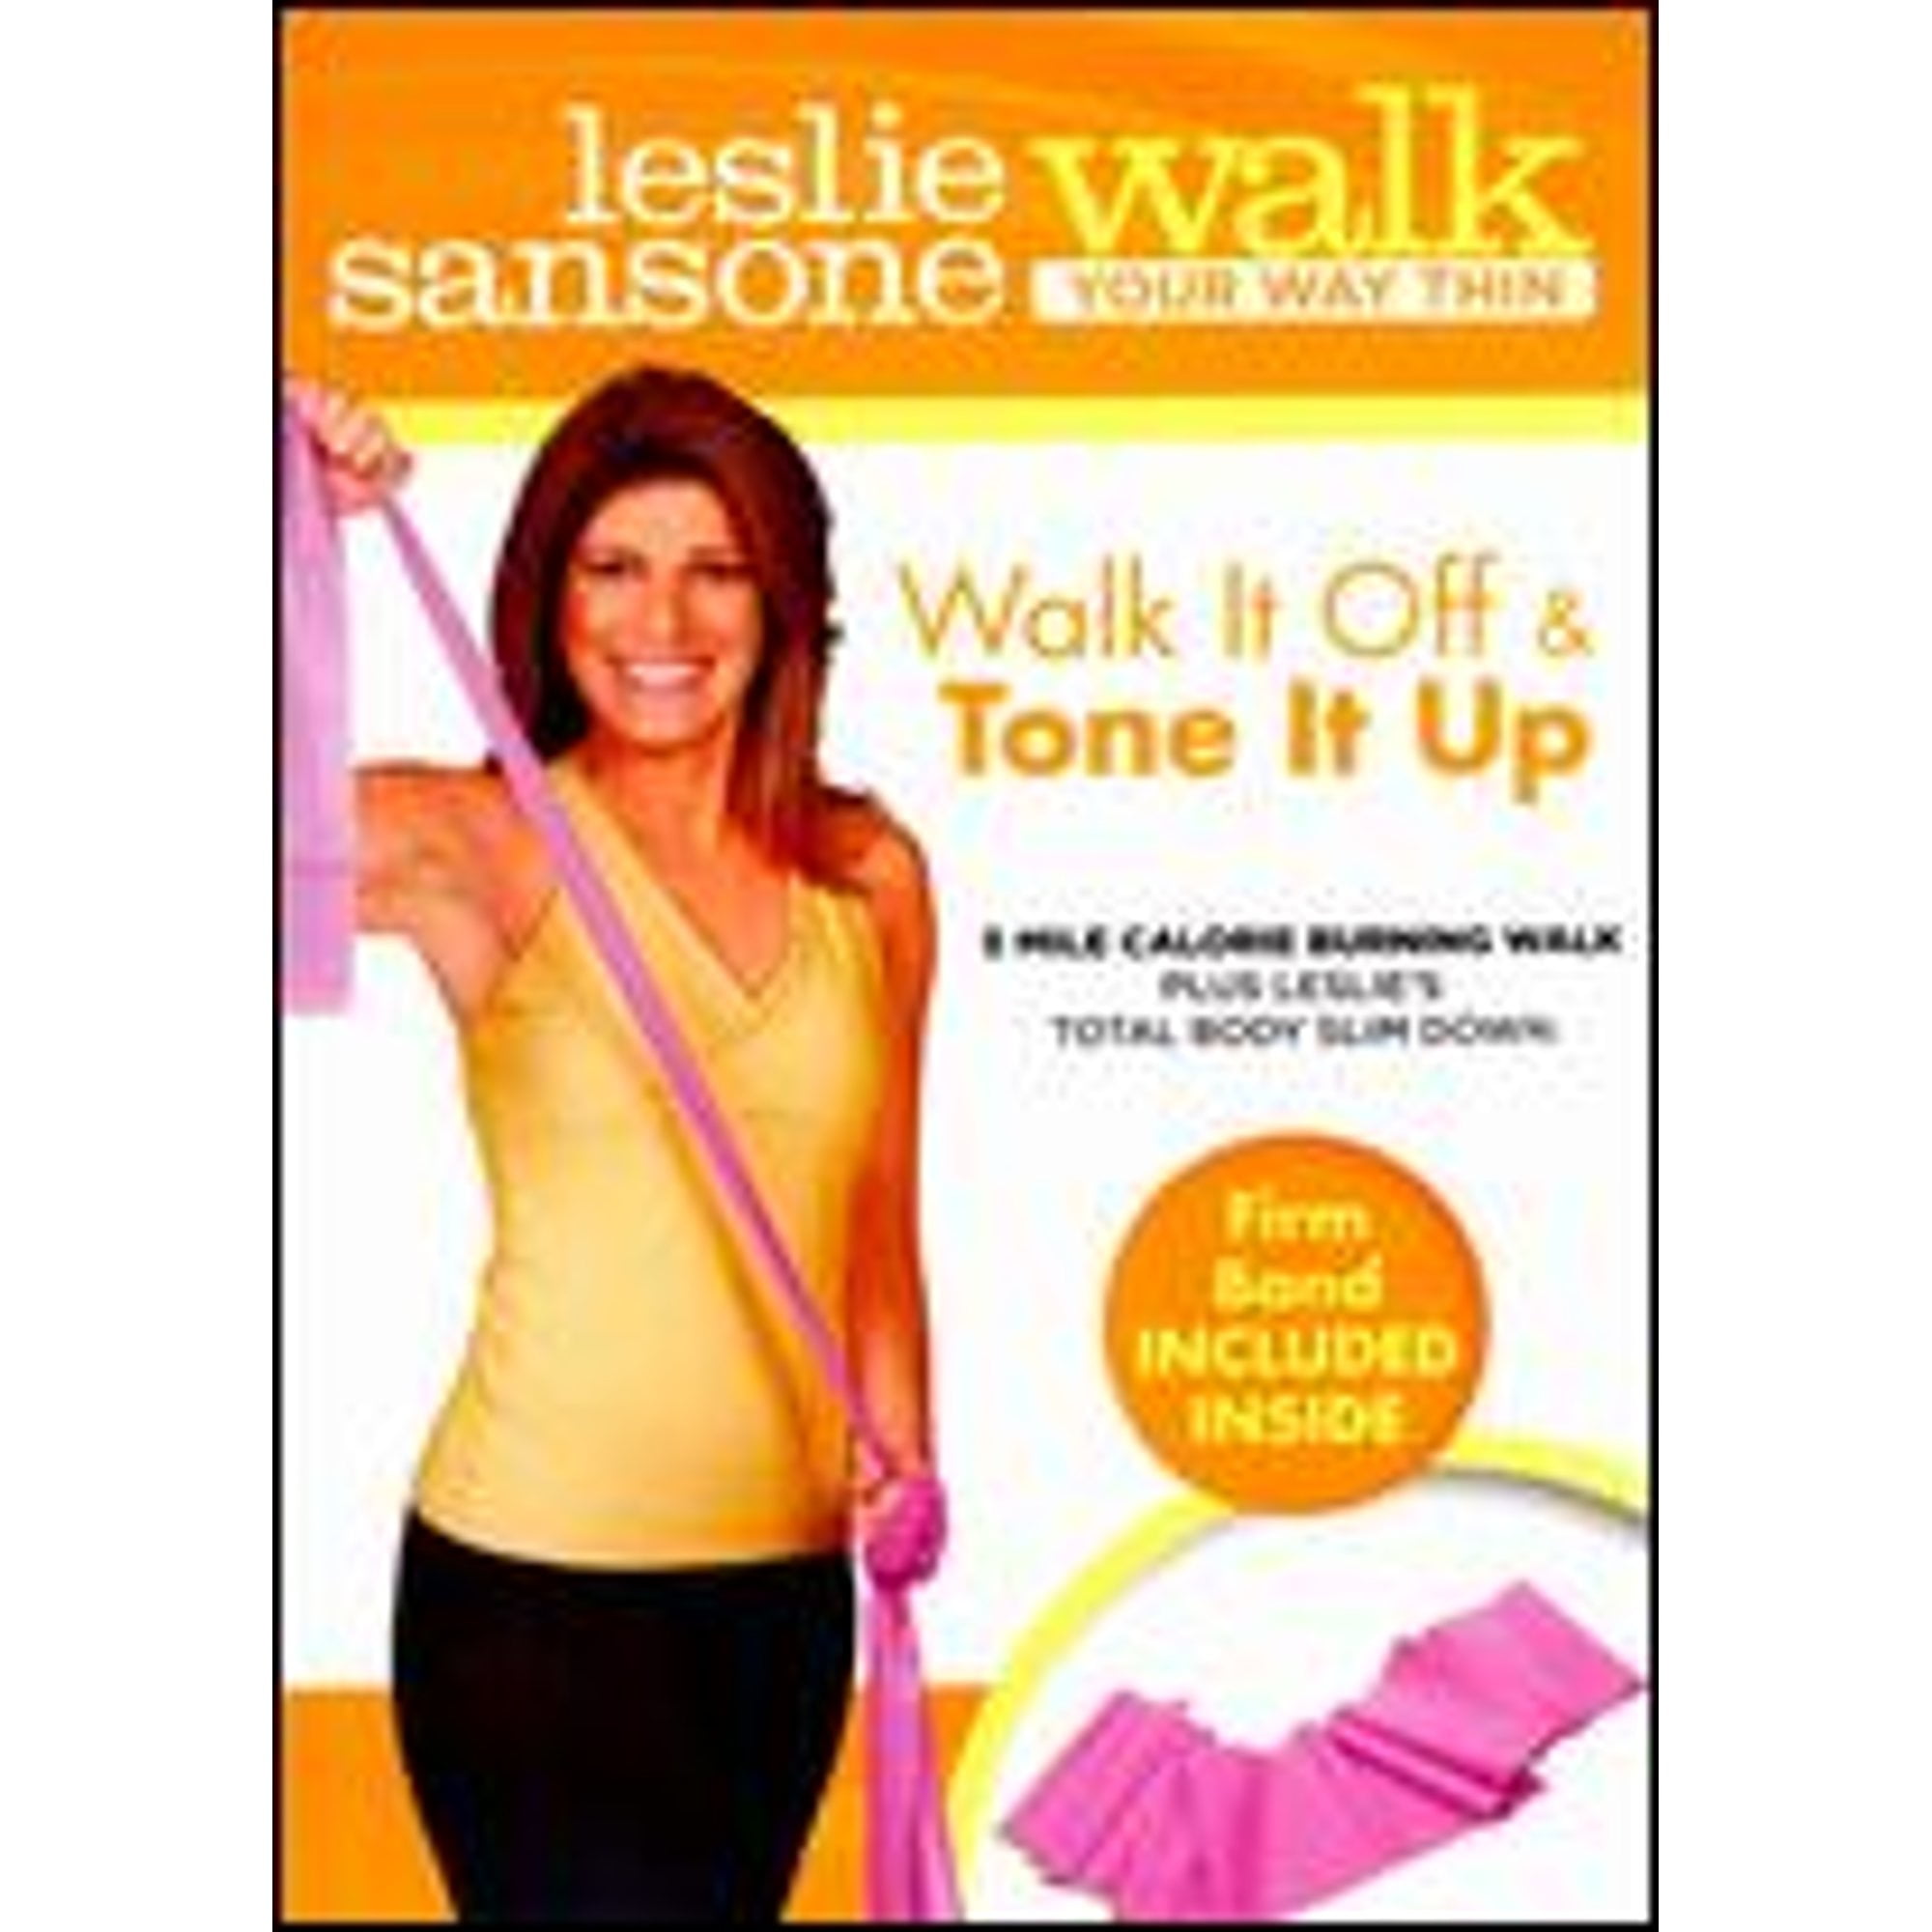 Pre-Owned Leslie Sansone: Walk Your Way Thin - It Off and Tone Up (DVD 0013132256795)